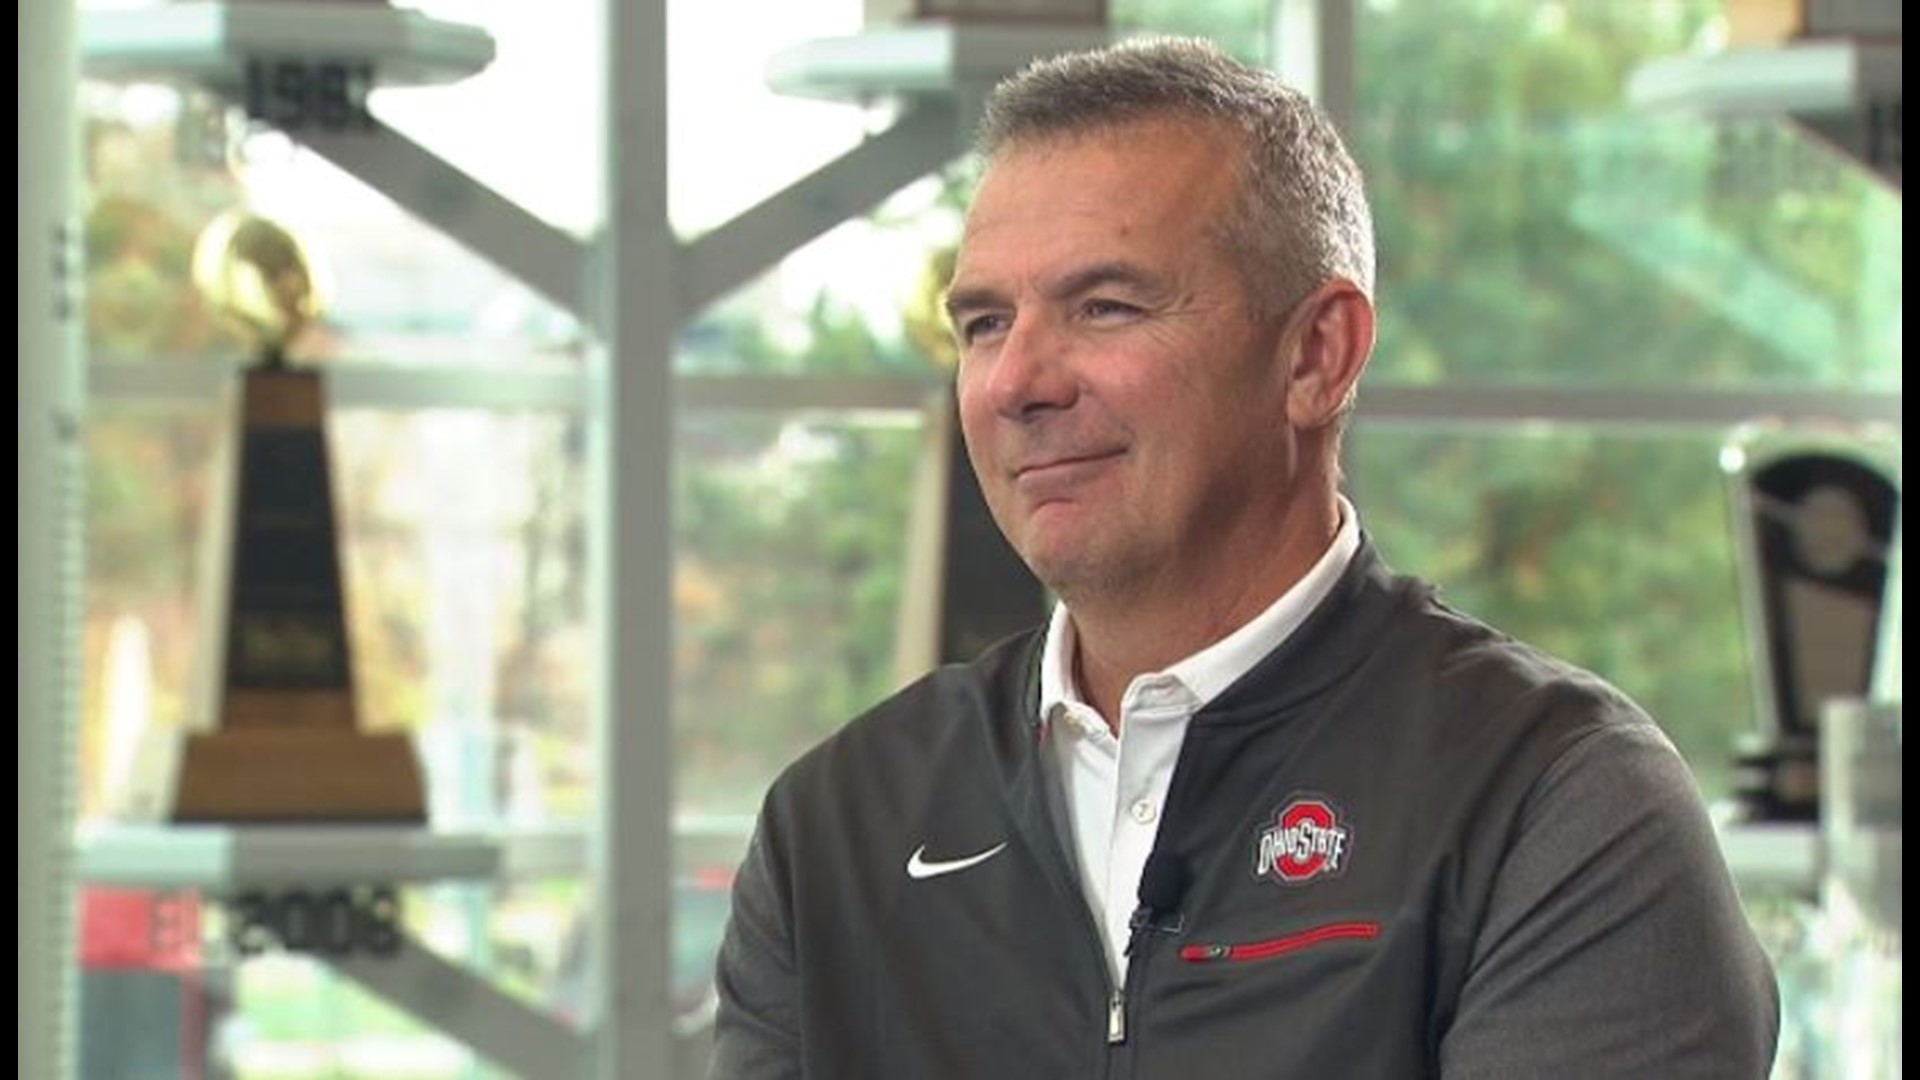 Urban Meyer talks to 10TV's Dom Tiberi about testing positive for COVID-19.